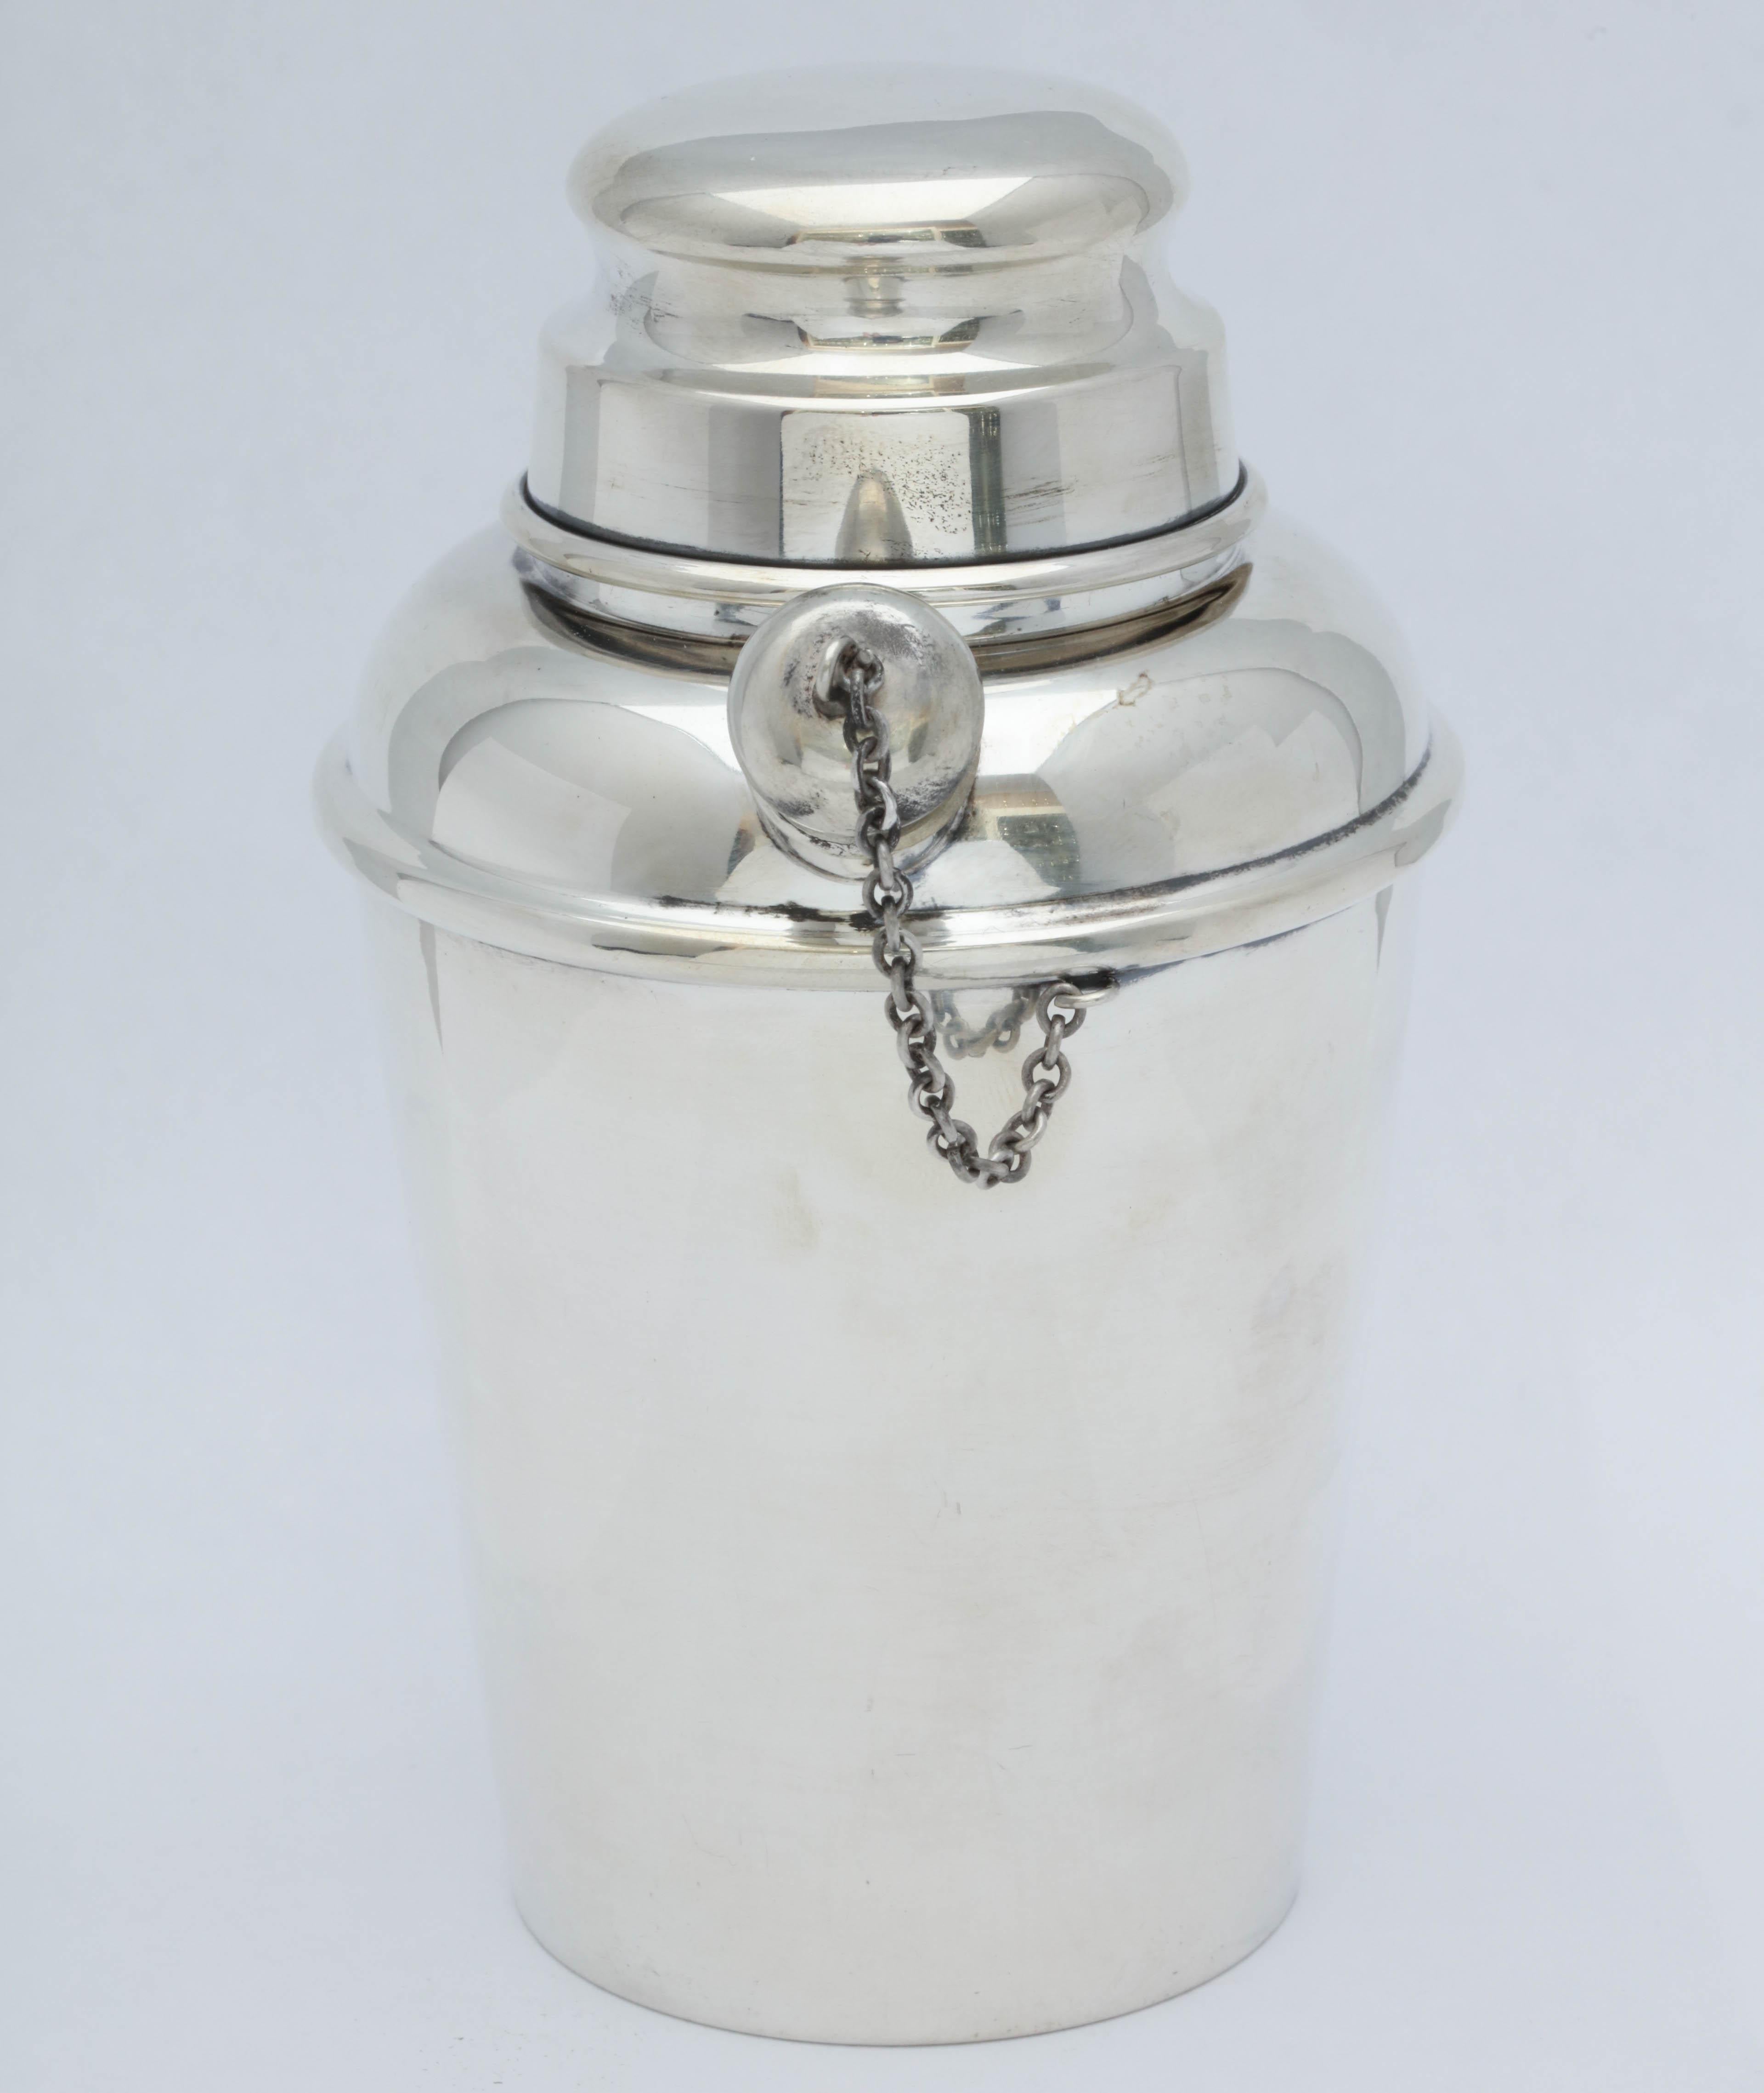 Midcentury, sterling silver cocktail Shaker - cocktails for two - Reed and Barton Silversmiths, Taunton, Mass, circa 1950. Measures: 5 1/2 inches high x 3 inches in diameter at widest point x 3 3/4 inches from end of spout to edge of Shaker. Weighs